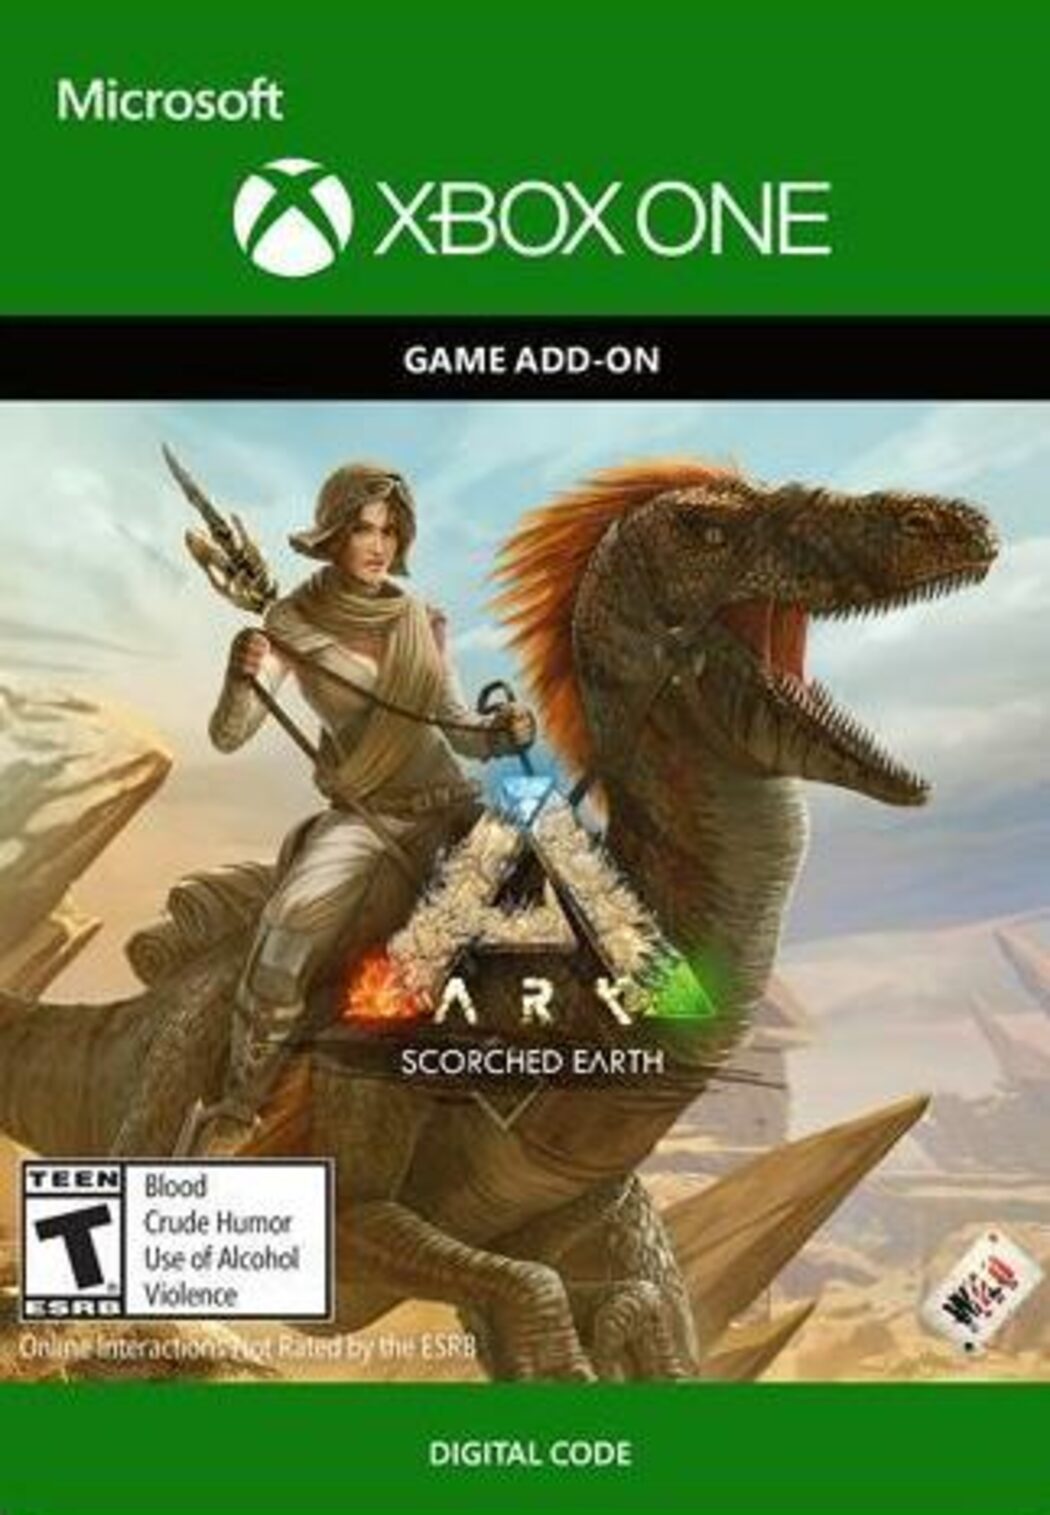 Buy ARK Scorched Earth Expansion Pack Key! |